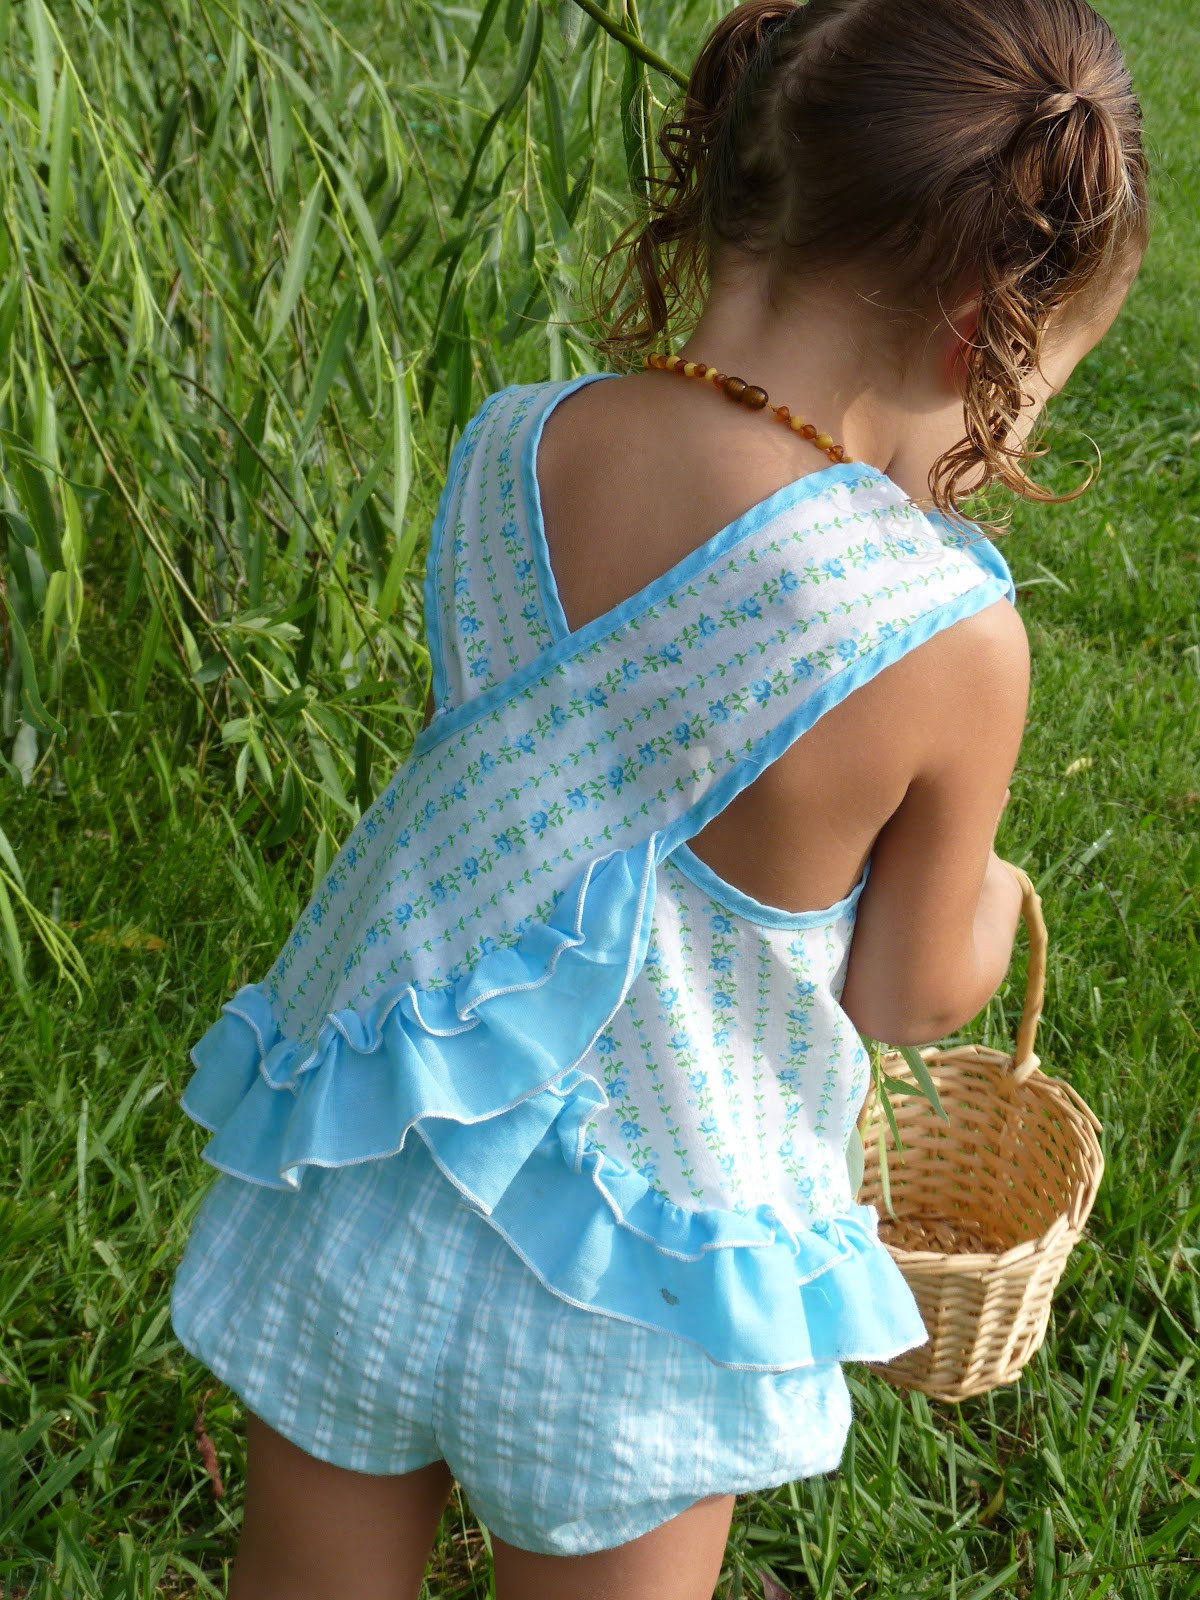 Fashion Kids Clothing
 At the Butterfly Ball Vintage Kid s Clothes Aqua Pinafore